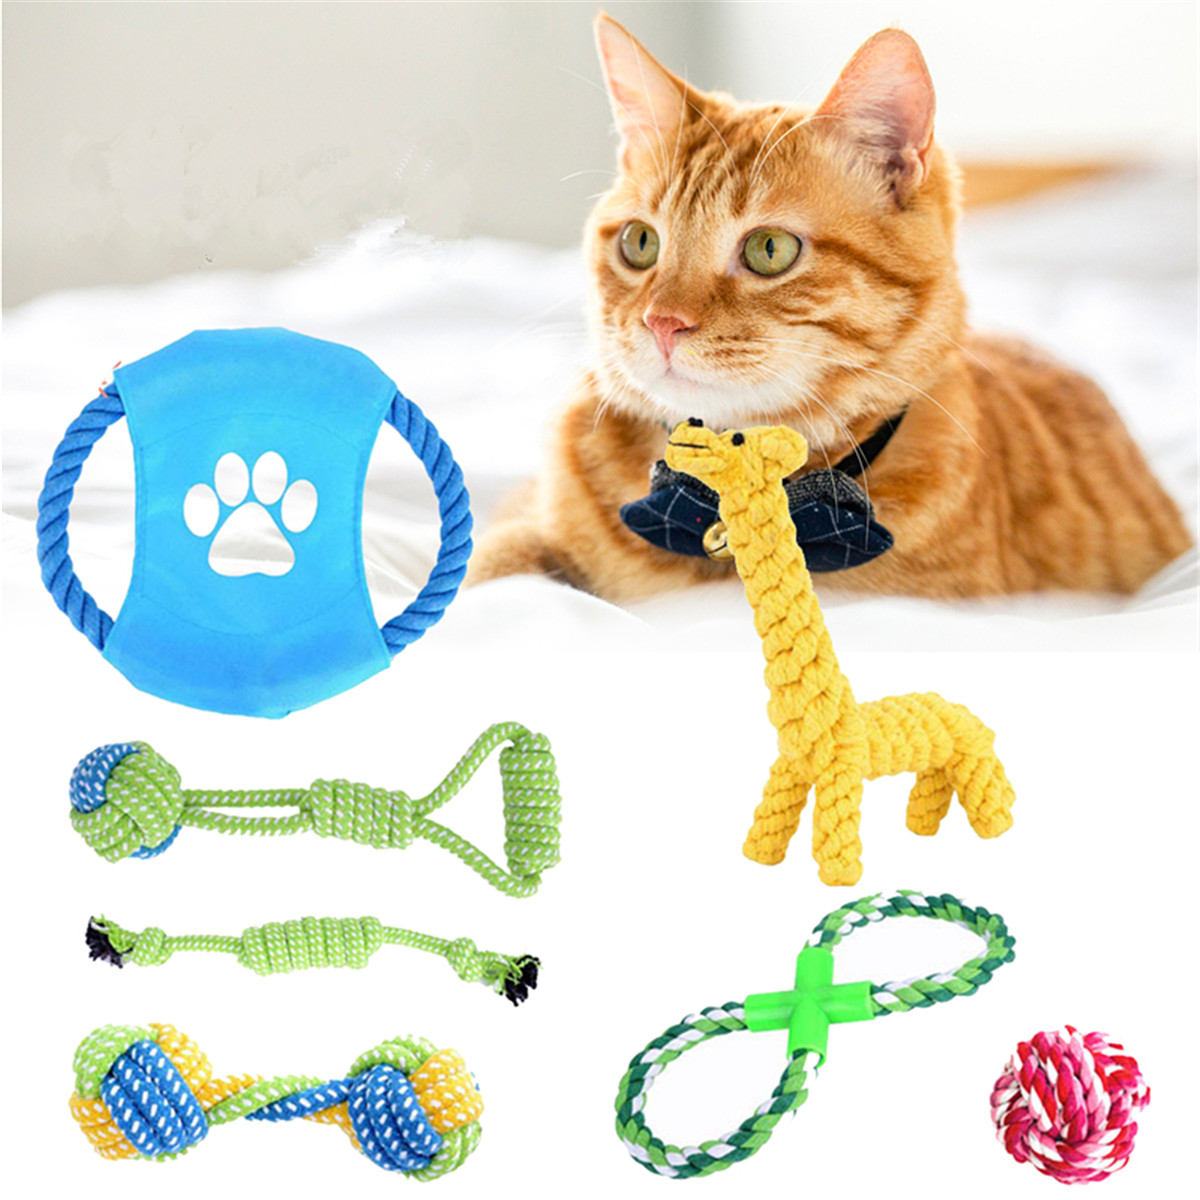 

7Pcs Pet Dog Rope Chew Toy Set Tough Knot Ball Cotton Teething Chewing Toys